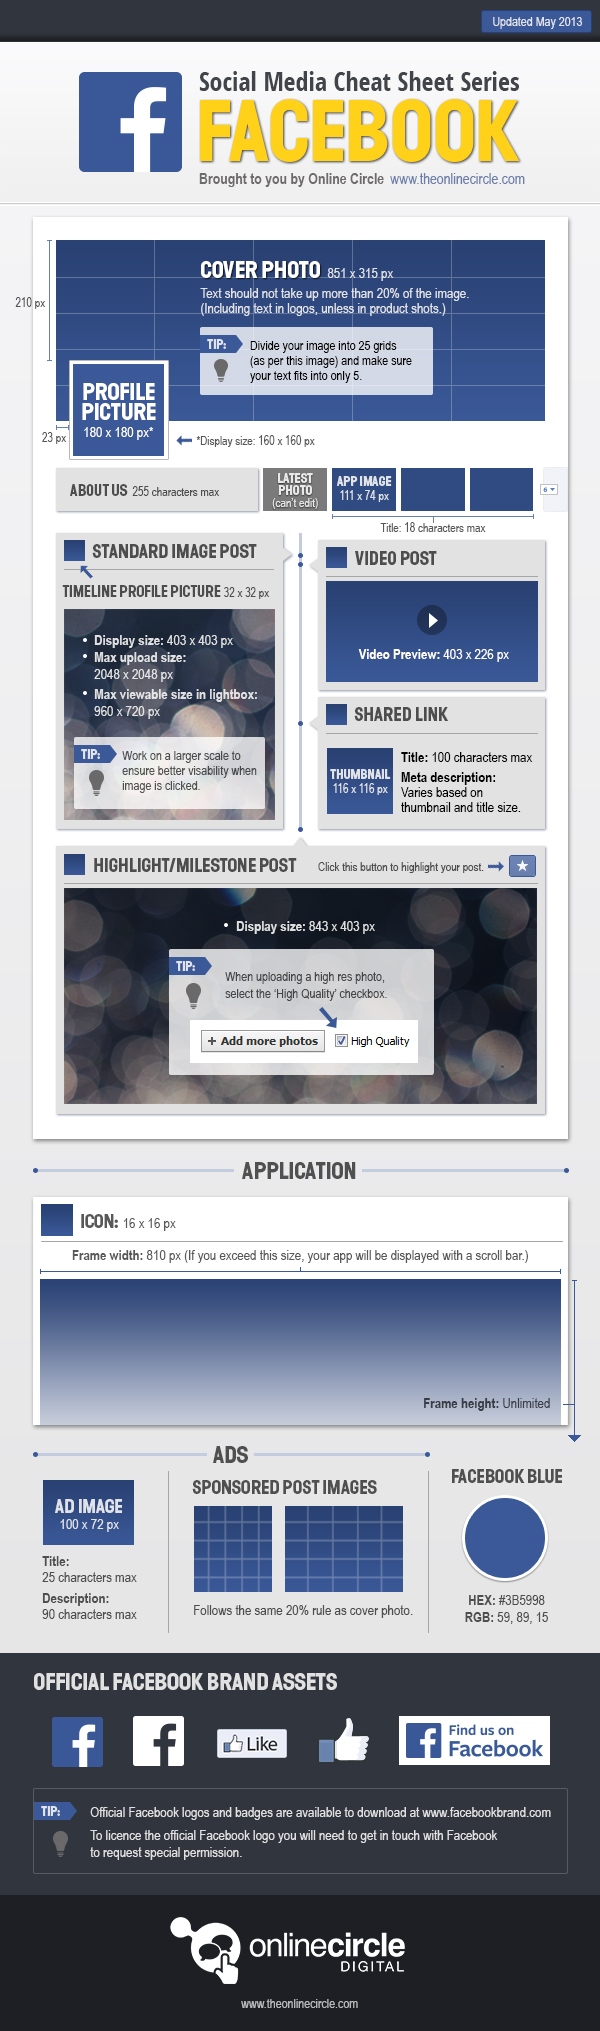 Facebook sizes and dimensions cheat sheet 2013